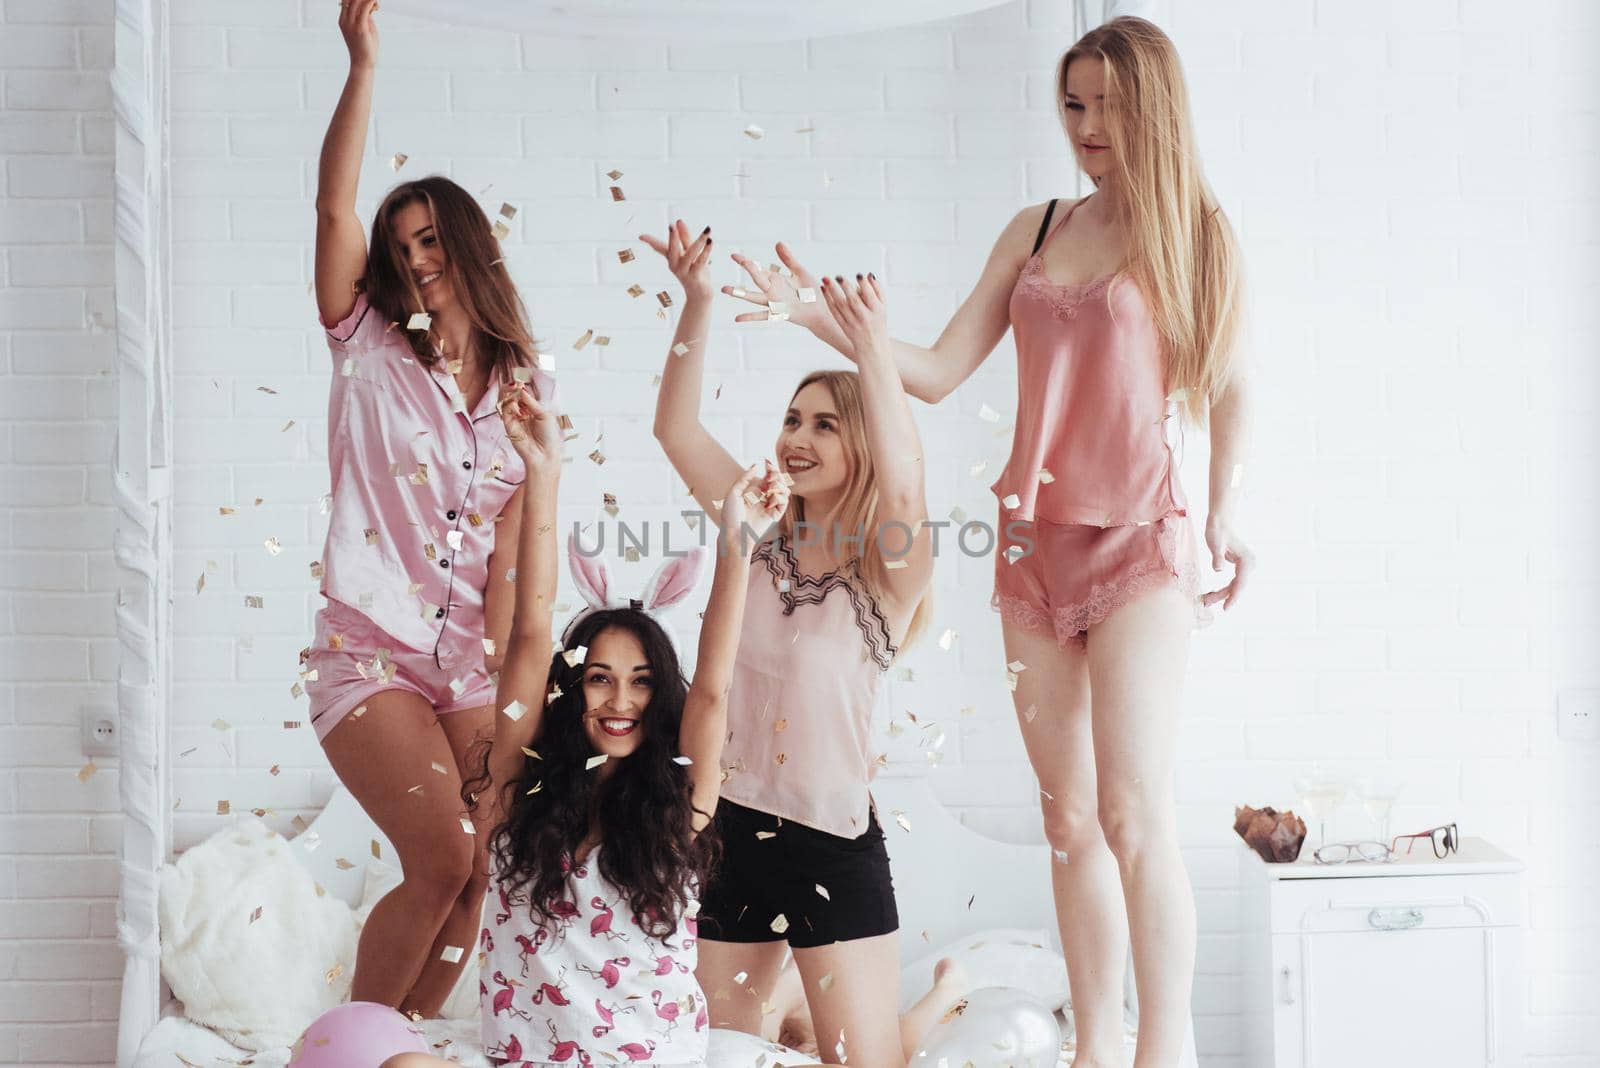 Hands up. Confetti in the air. Young girls have fun on the white bed in nice room by Standret